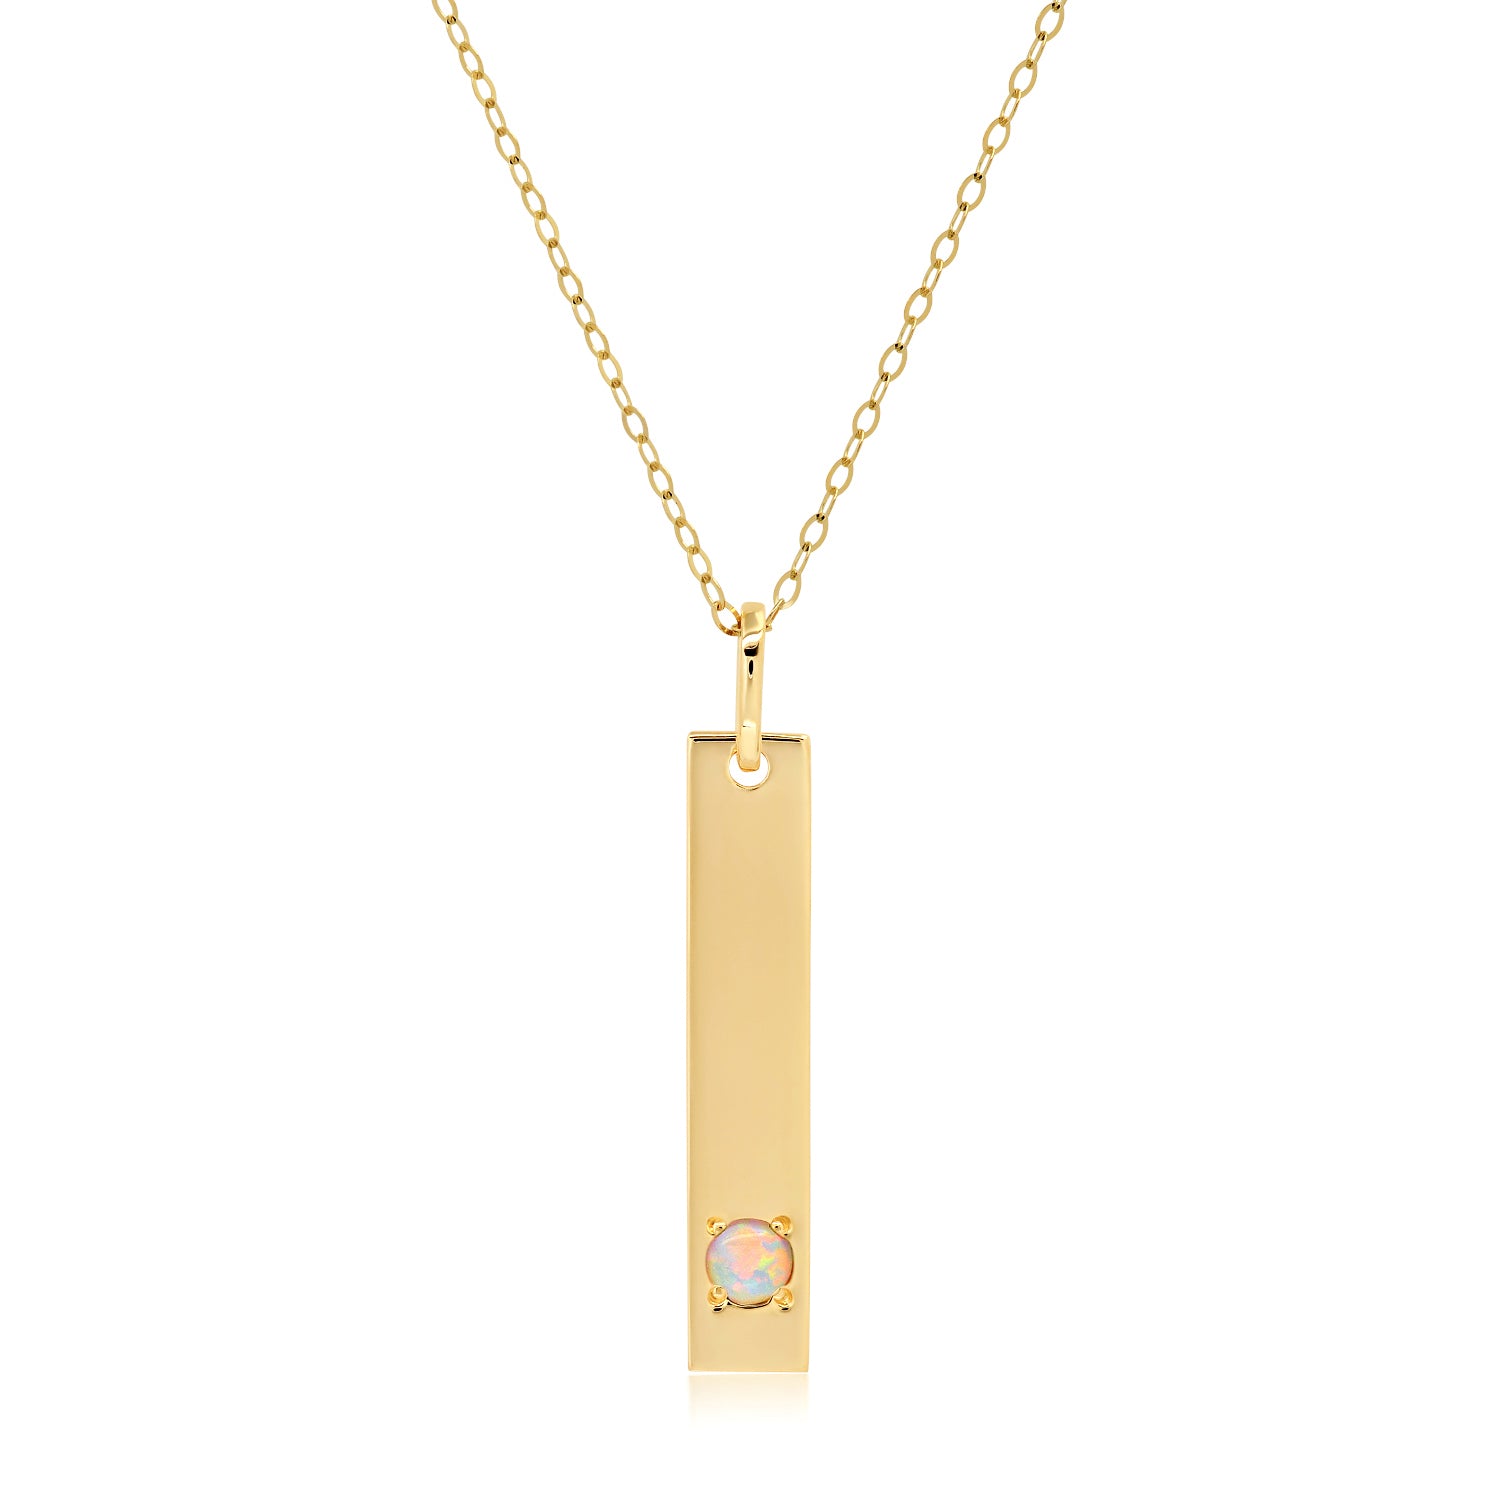 MAX + STONE 14k Yellow Gold Bar Pendant Necklace with 3mm Small Round Gemstone Adjustable Cable Chain 16 Inches to 18 Inches with Spring Ring Clasp female